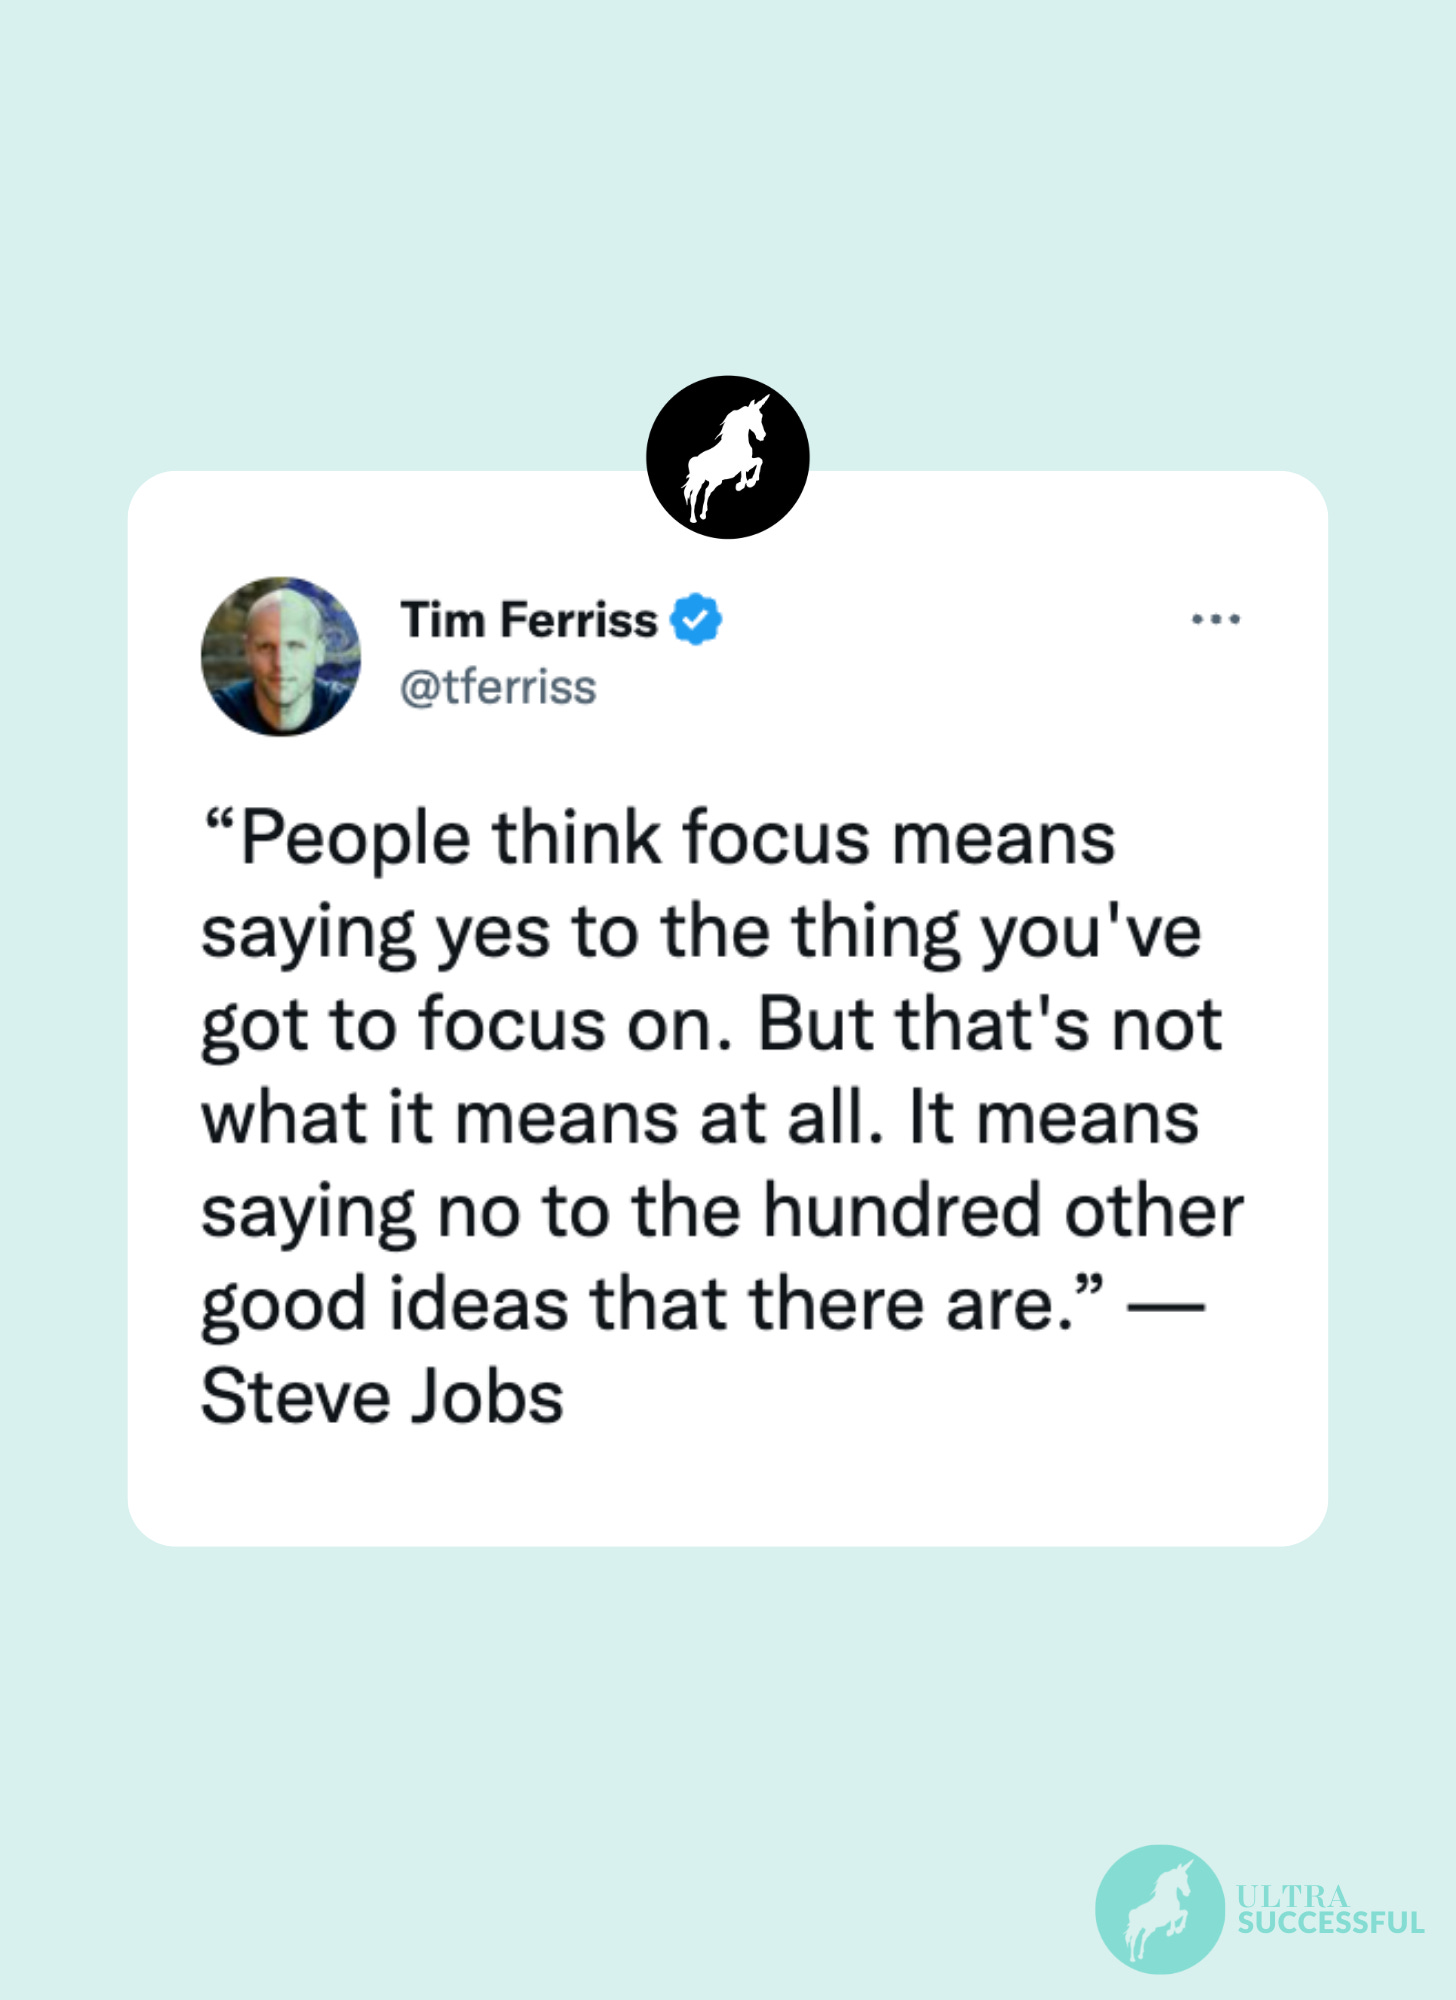 @tferriss: “People think focus means saying yes to the thing you've got to focus on. But that's not what it means at all. It means saying no to the hundred other good ideas that there are.” — Steve Jobs